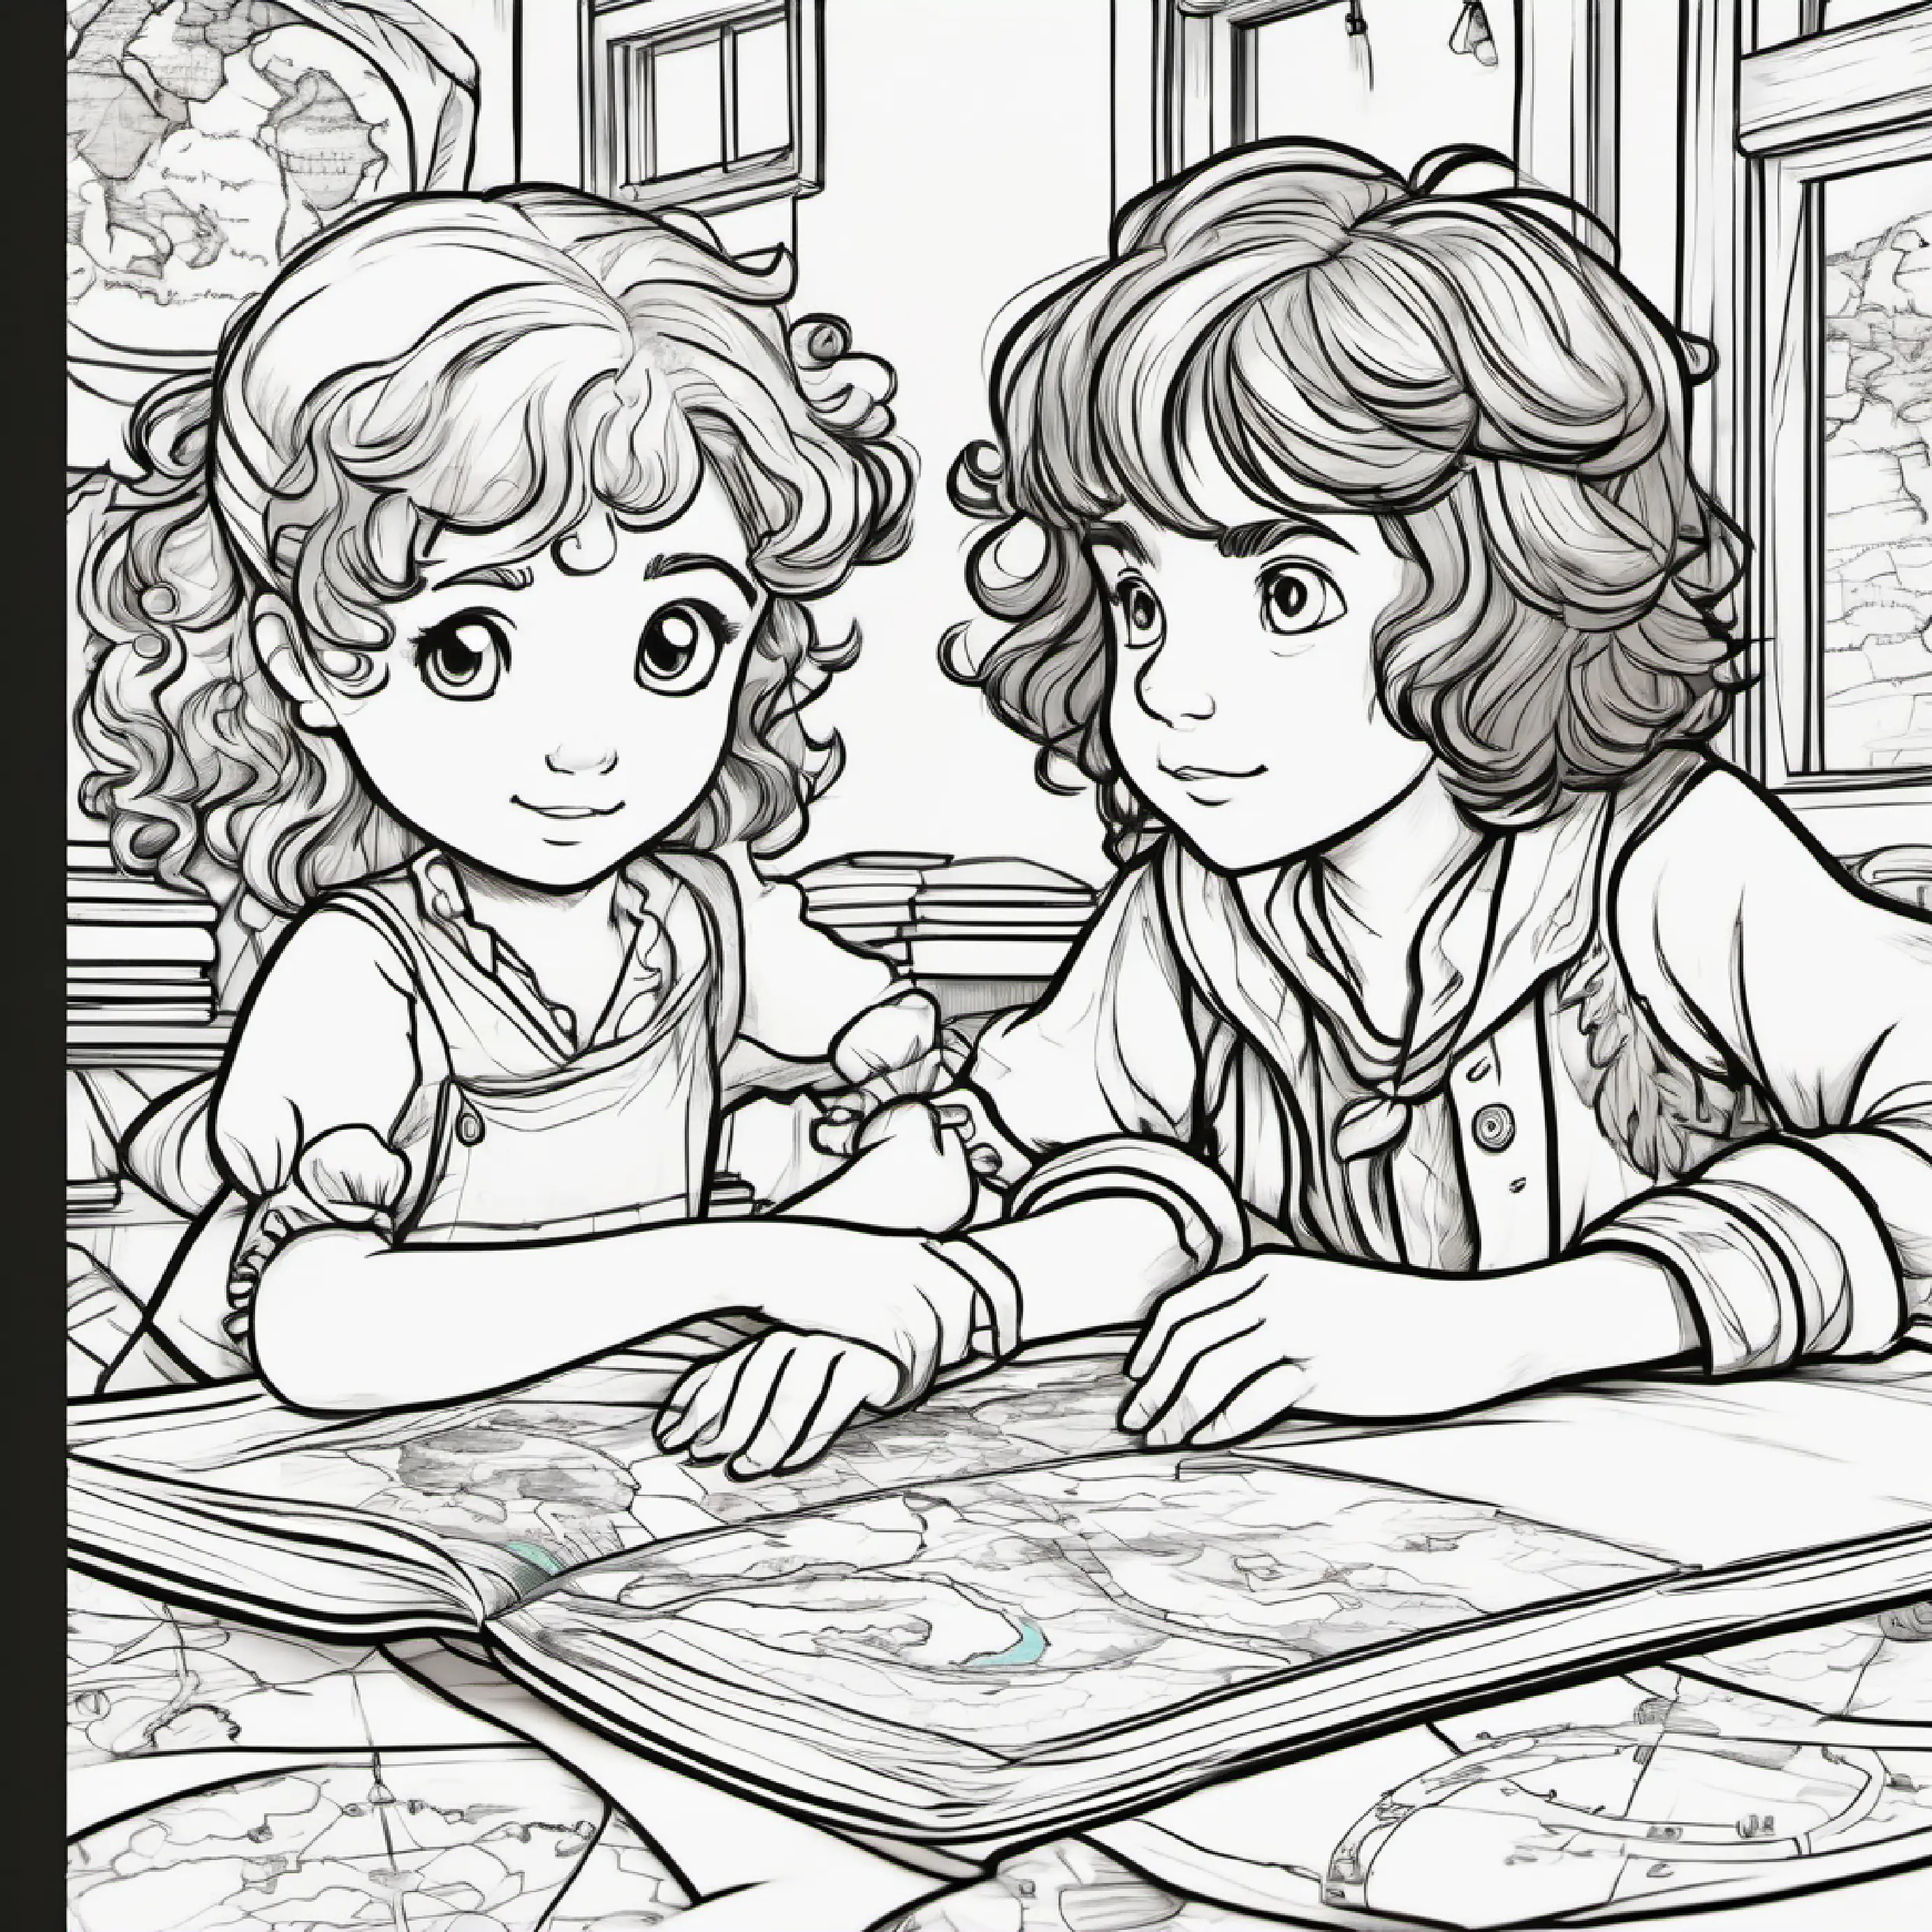 Little girl with bright green eyes and curly brown hair discovers New boy with short black hair and thoughtful brown eyes's interests in pirates and maps.